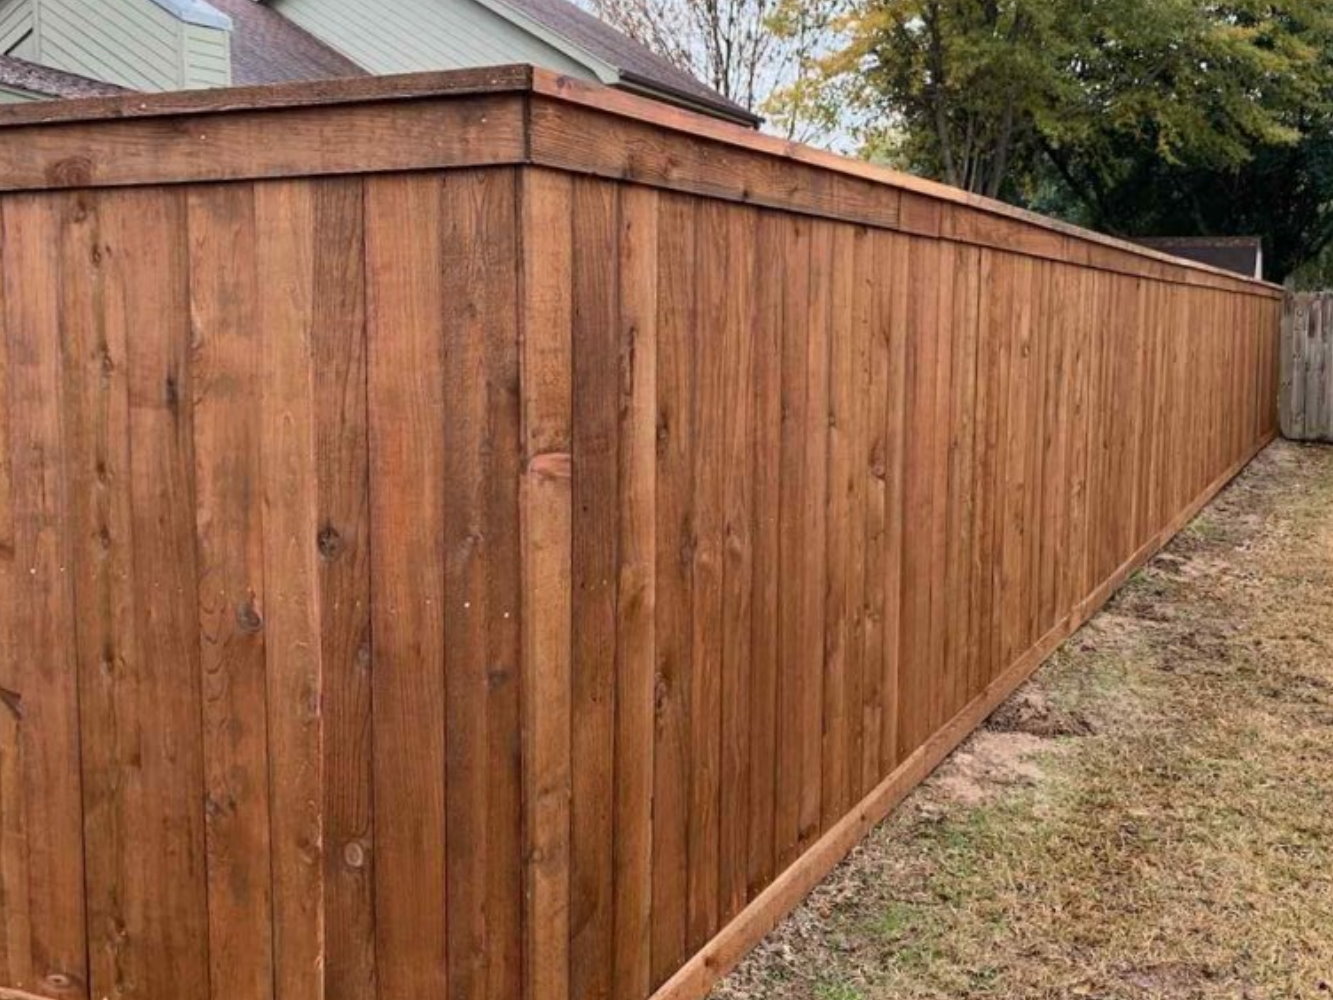 Hope AR cap and trim style wood fence